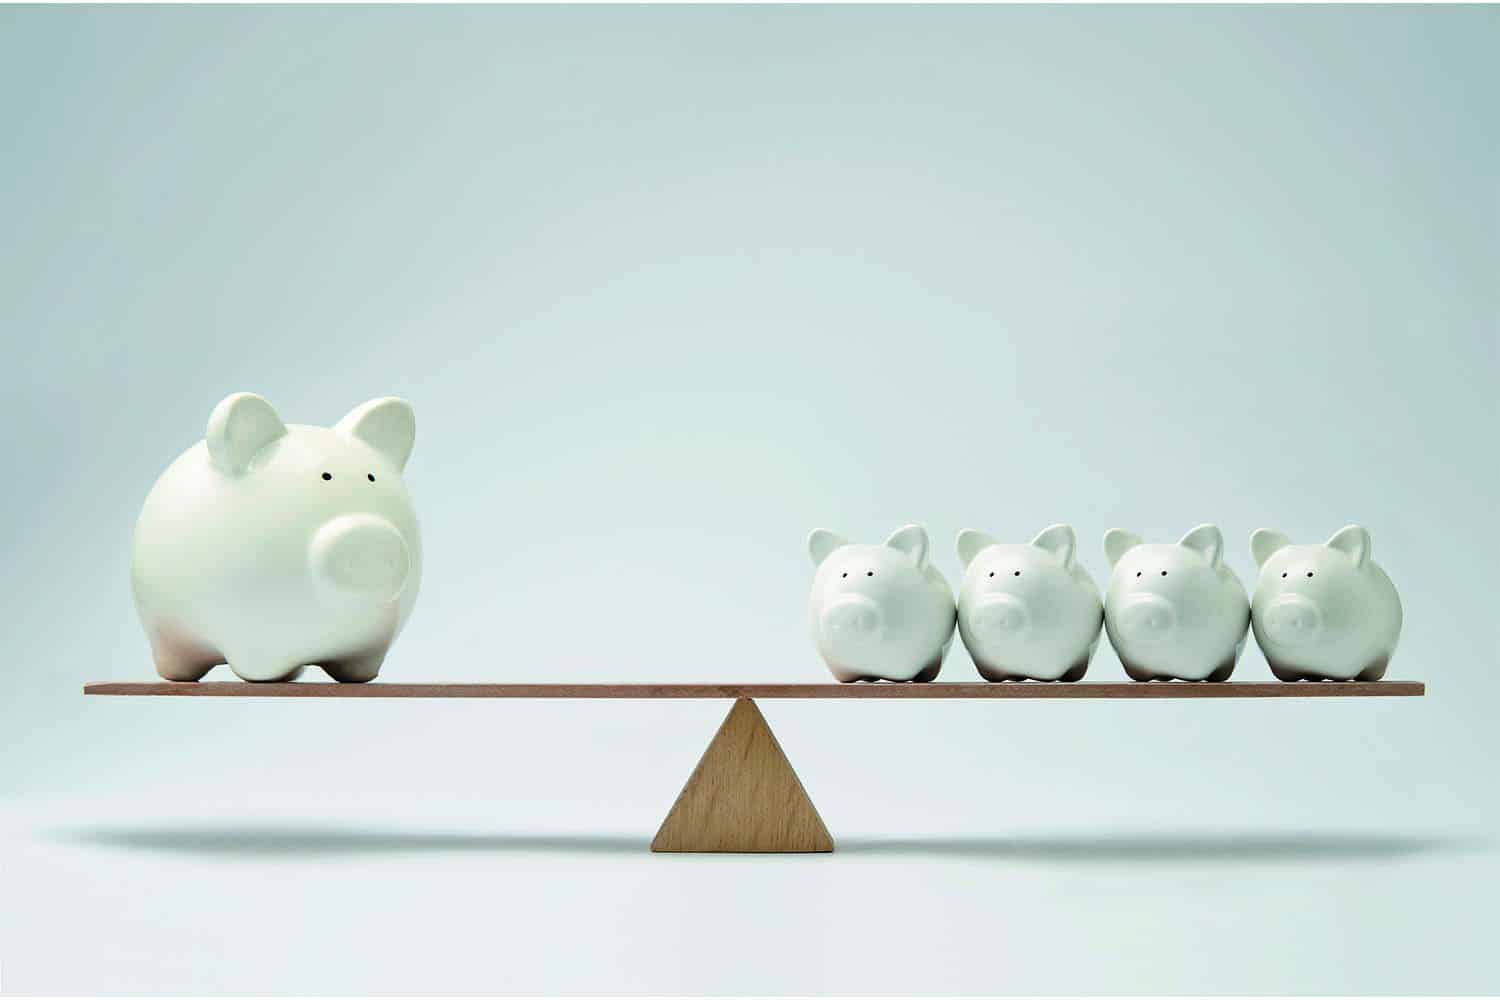 : large white piggy bank balancing four small white piggies on wooden see-saw